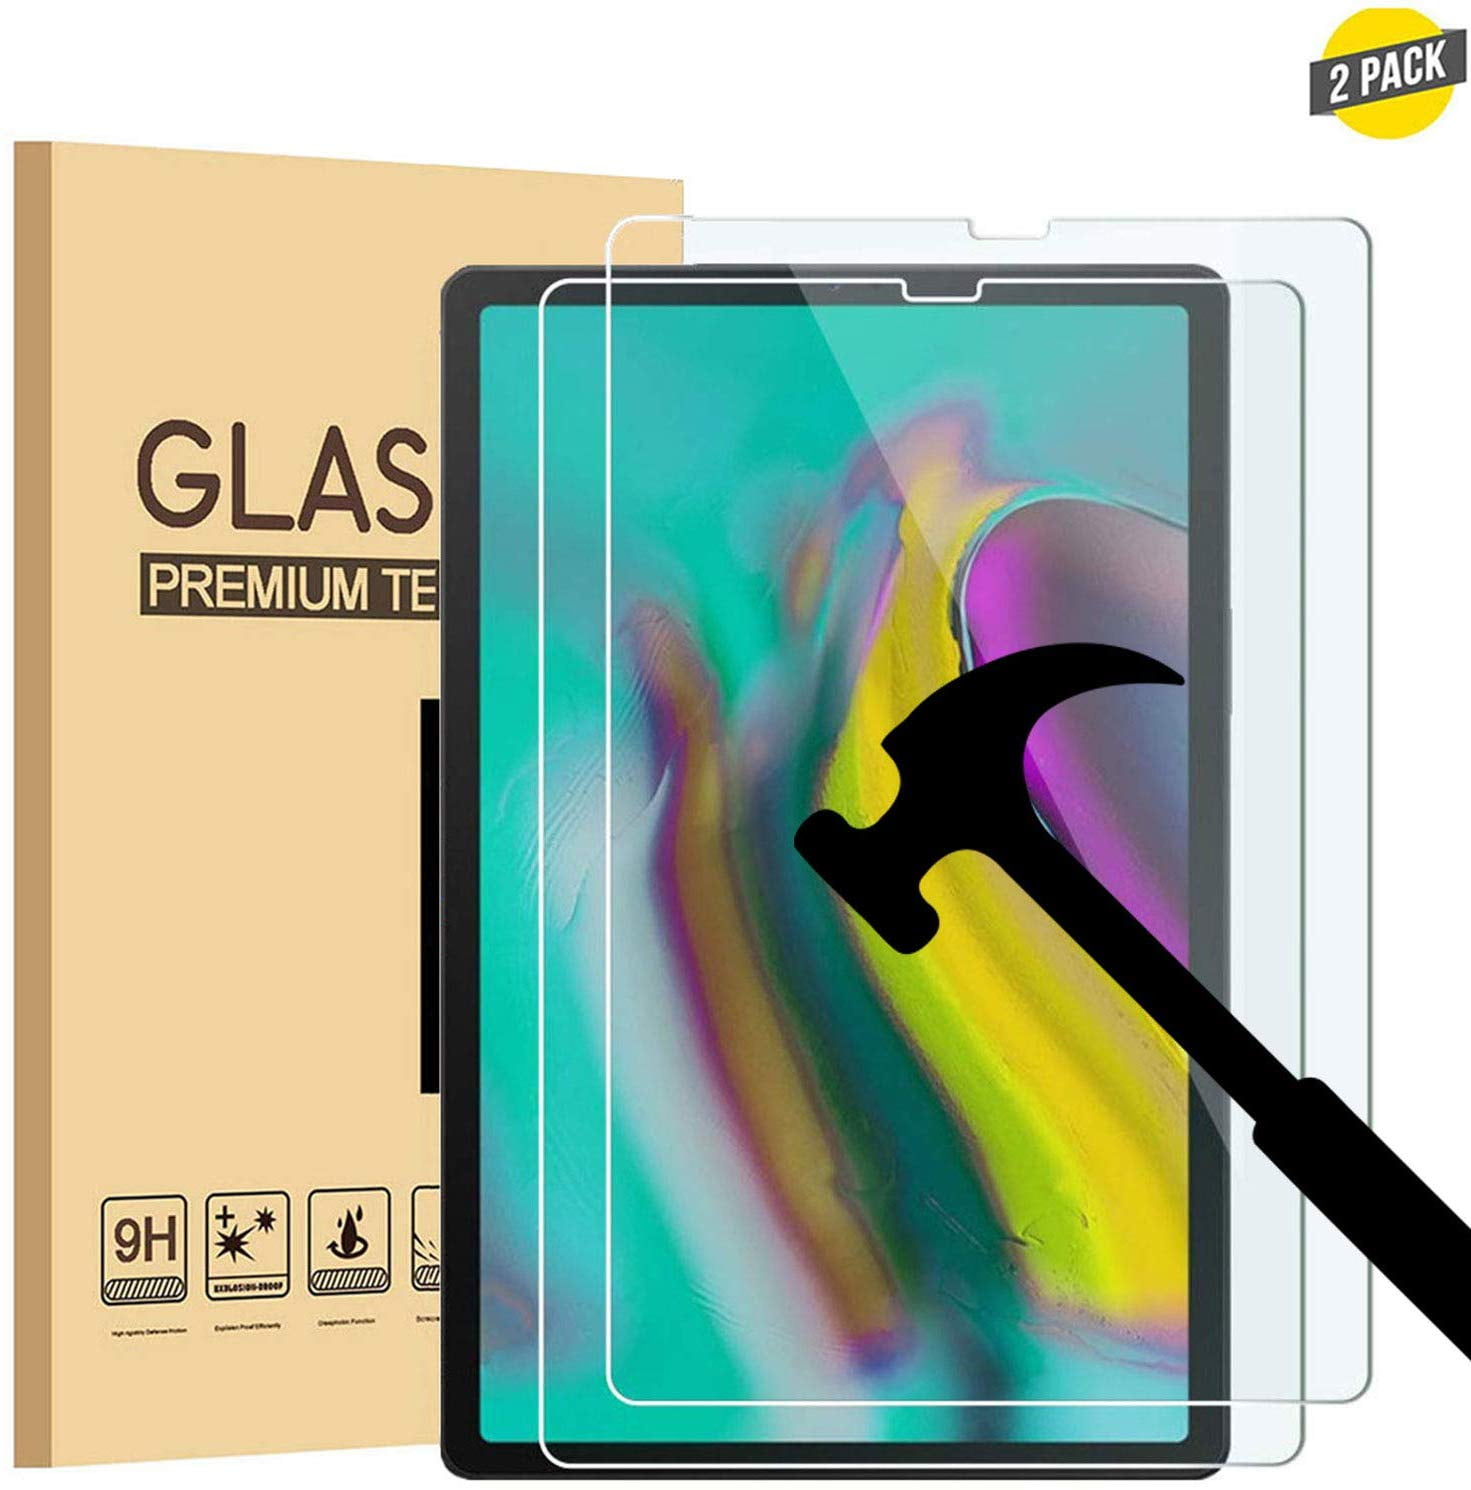 escaleren Nuchter loyaliteit 2 Pack] EpicGadget for Galaxy Tab S6 10.5" (SM-T860/865) 2019 Screen  Protector, 9H Scratch Resistant Bubble Free Tempered Glass Screen Protector  for Samsung Galaxy Tab S6 10.5 Tablet Released 2019 - Walmart.com